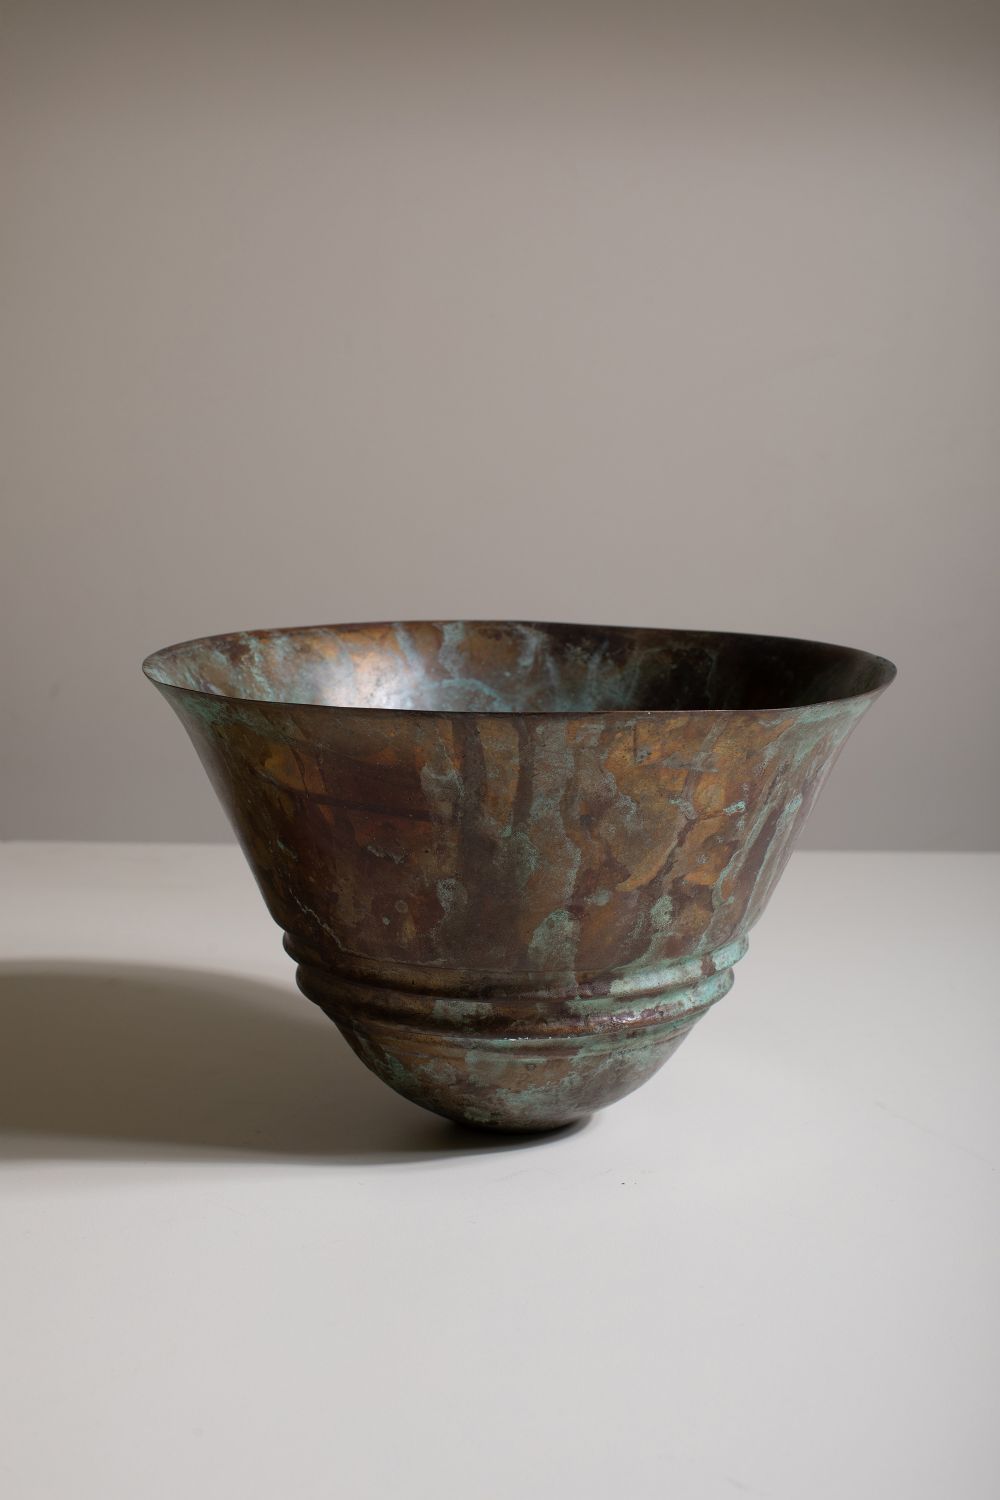 BRONZE BOWL by Sonja Landweer sold for €4,200 at deVeres Auctions